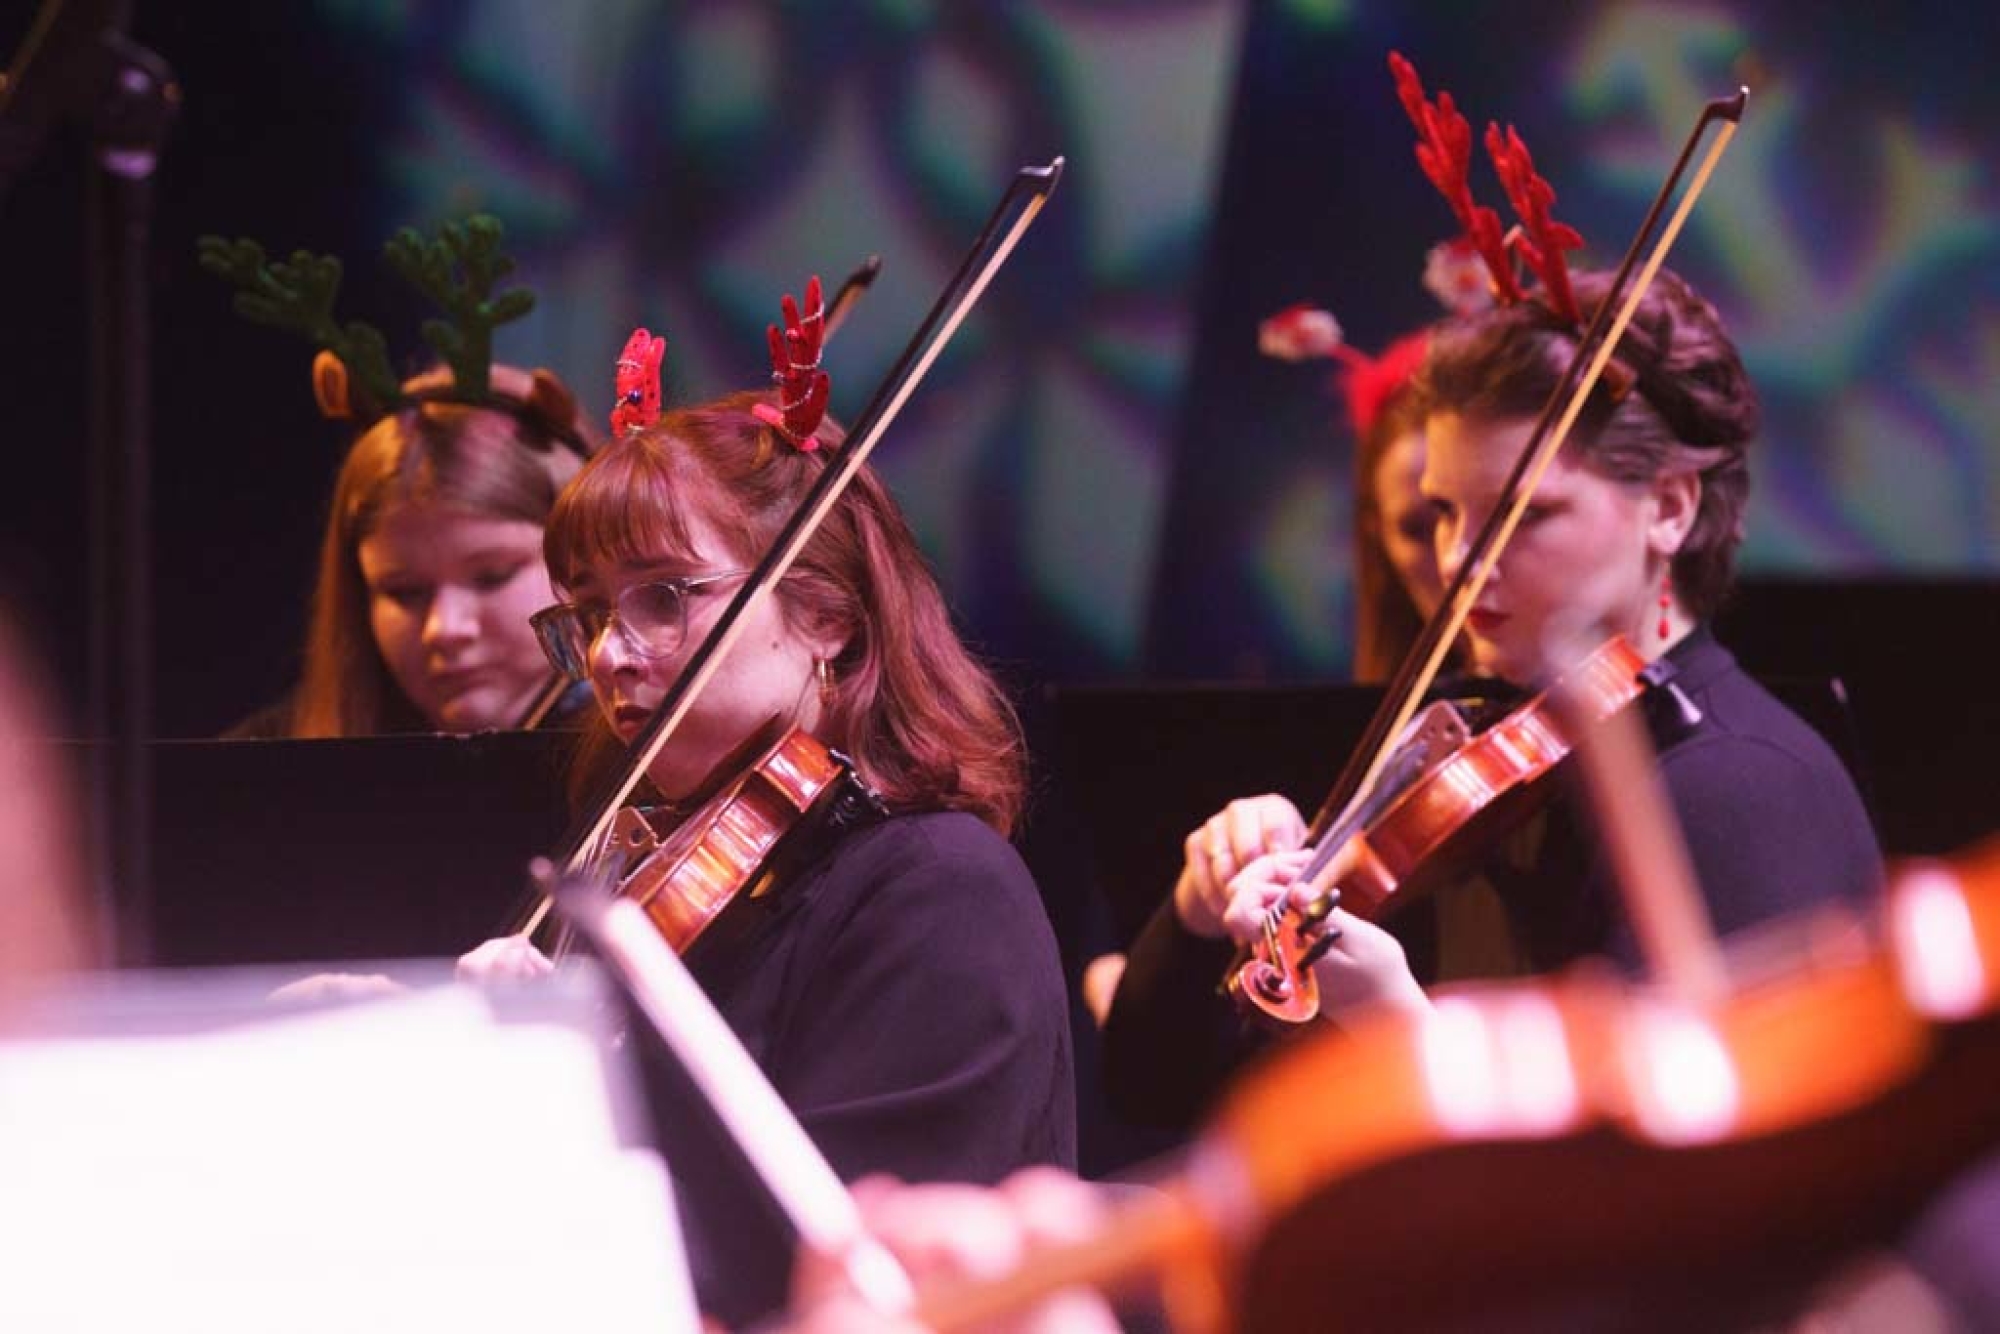 Three violinists wearing felt reindeer ears and wearing black outfits play their violins.